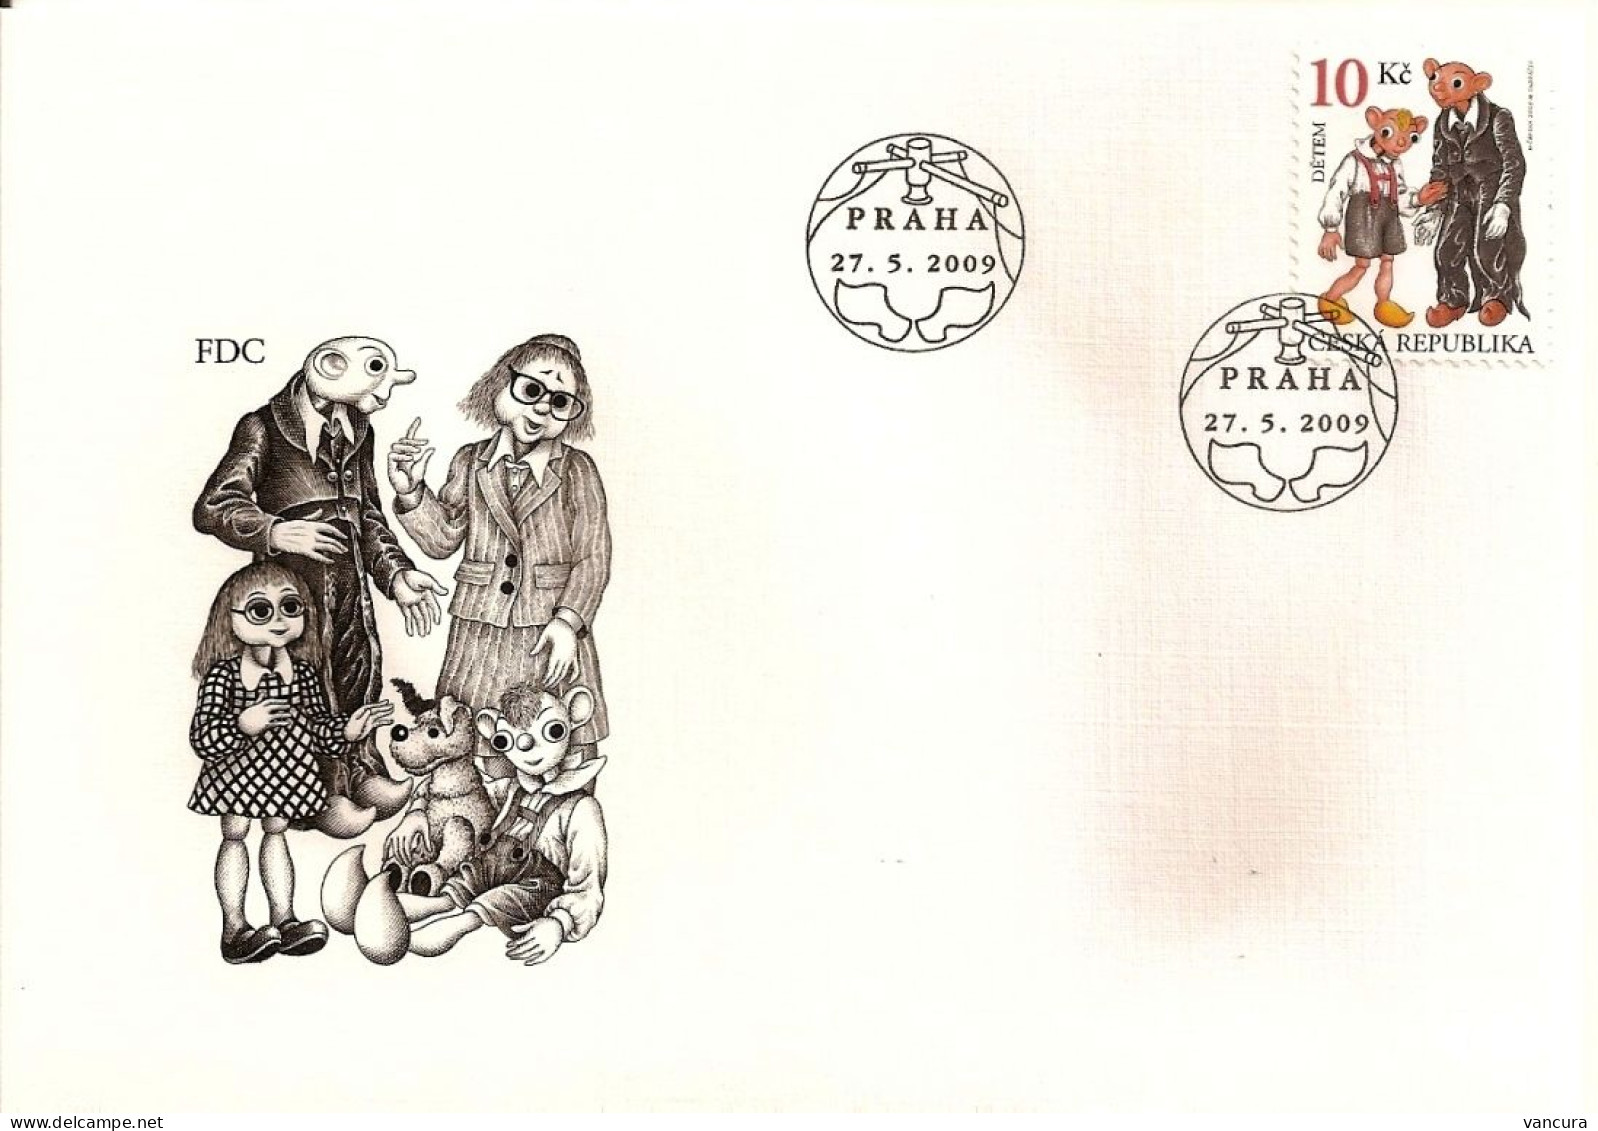 FDC 599 Czech Republic Spejbl And Hurvinek Puppets 2009 NOTICE - POOR SCAN, BUT THE FDC IS O.K. - Puppets